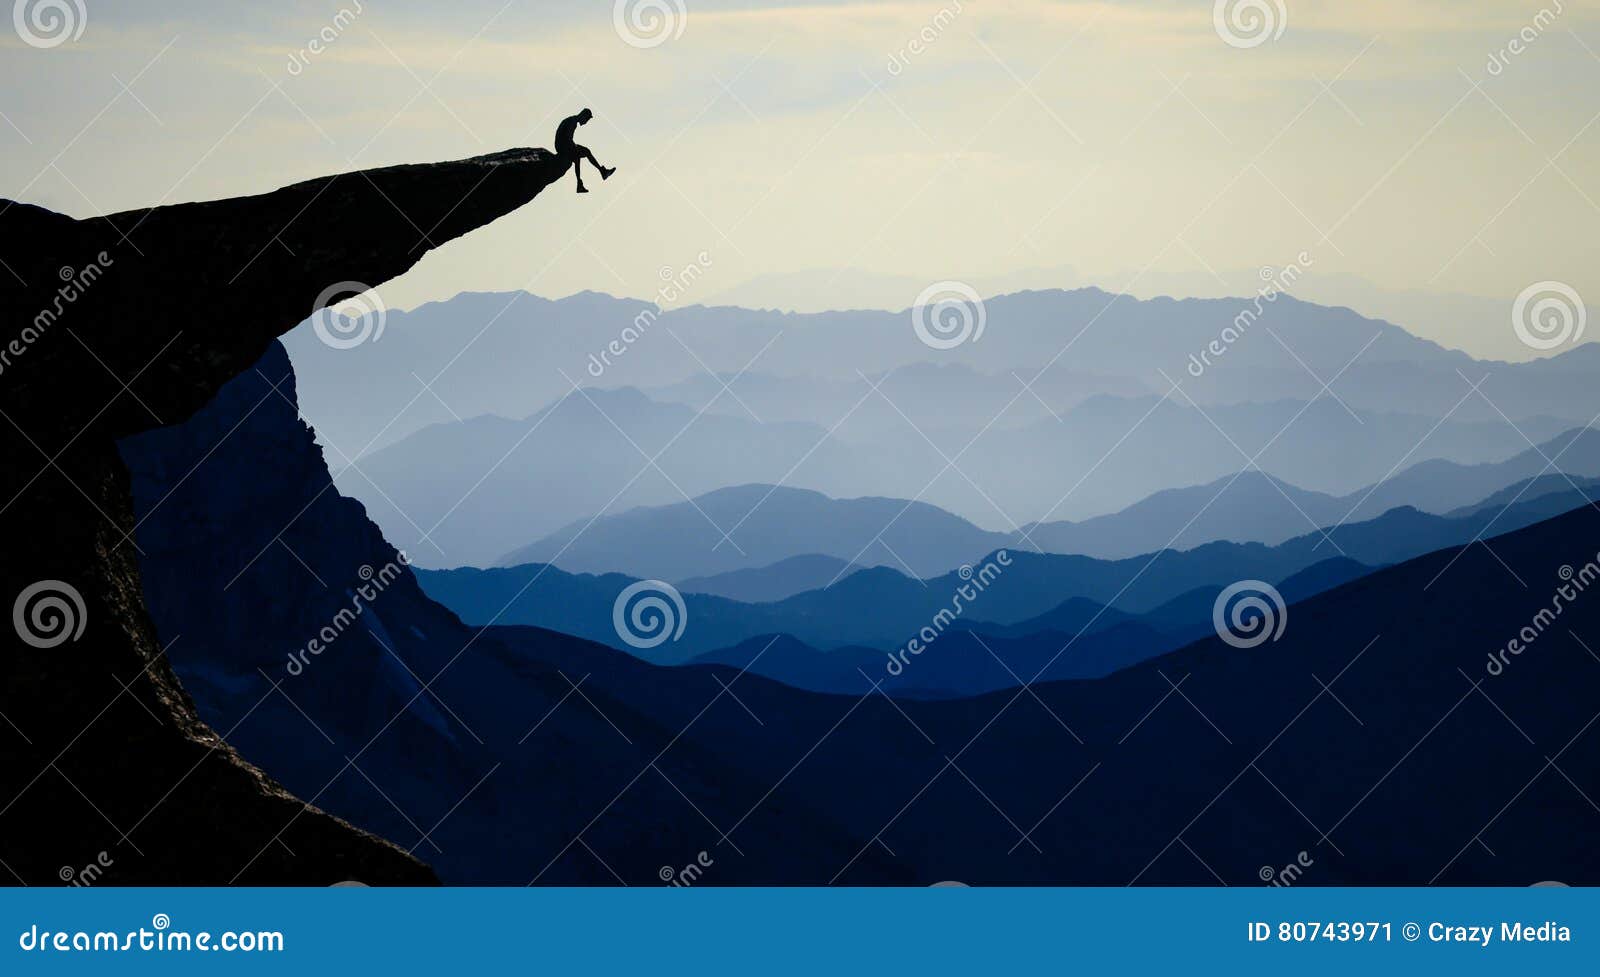 mountaineer sitting on rocky outcropping